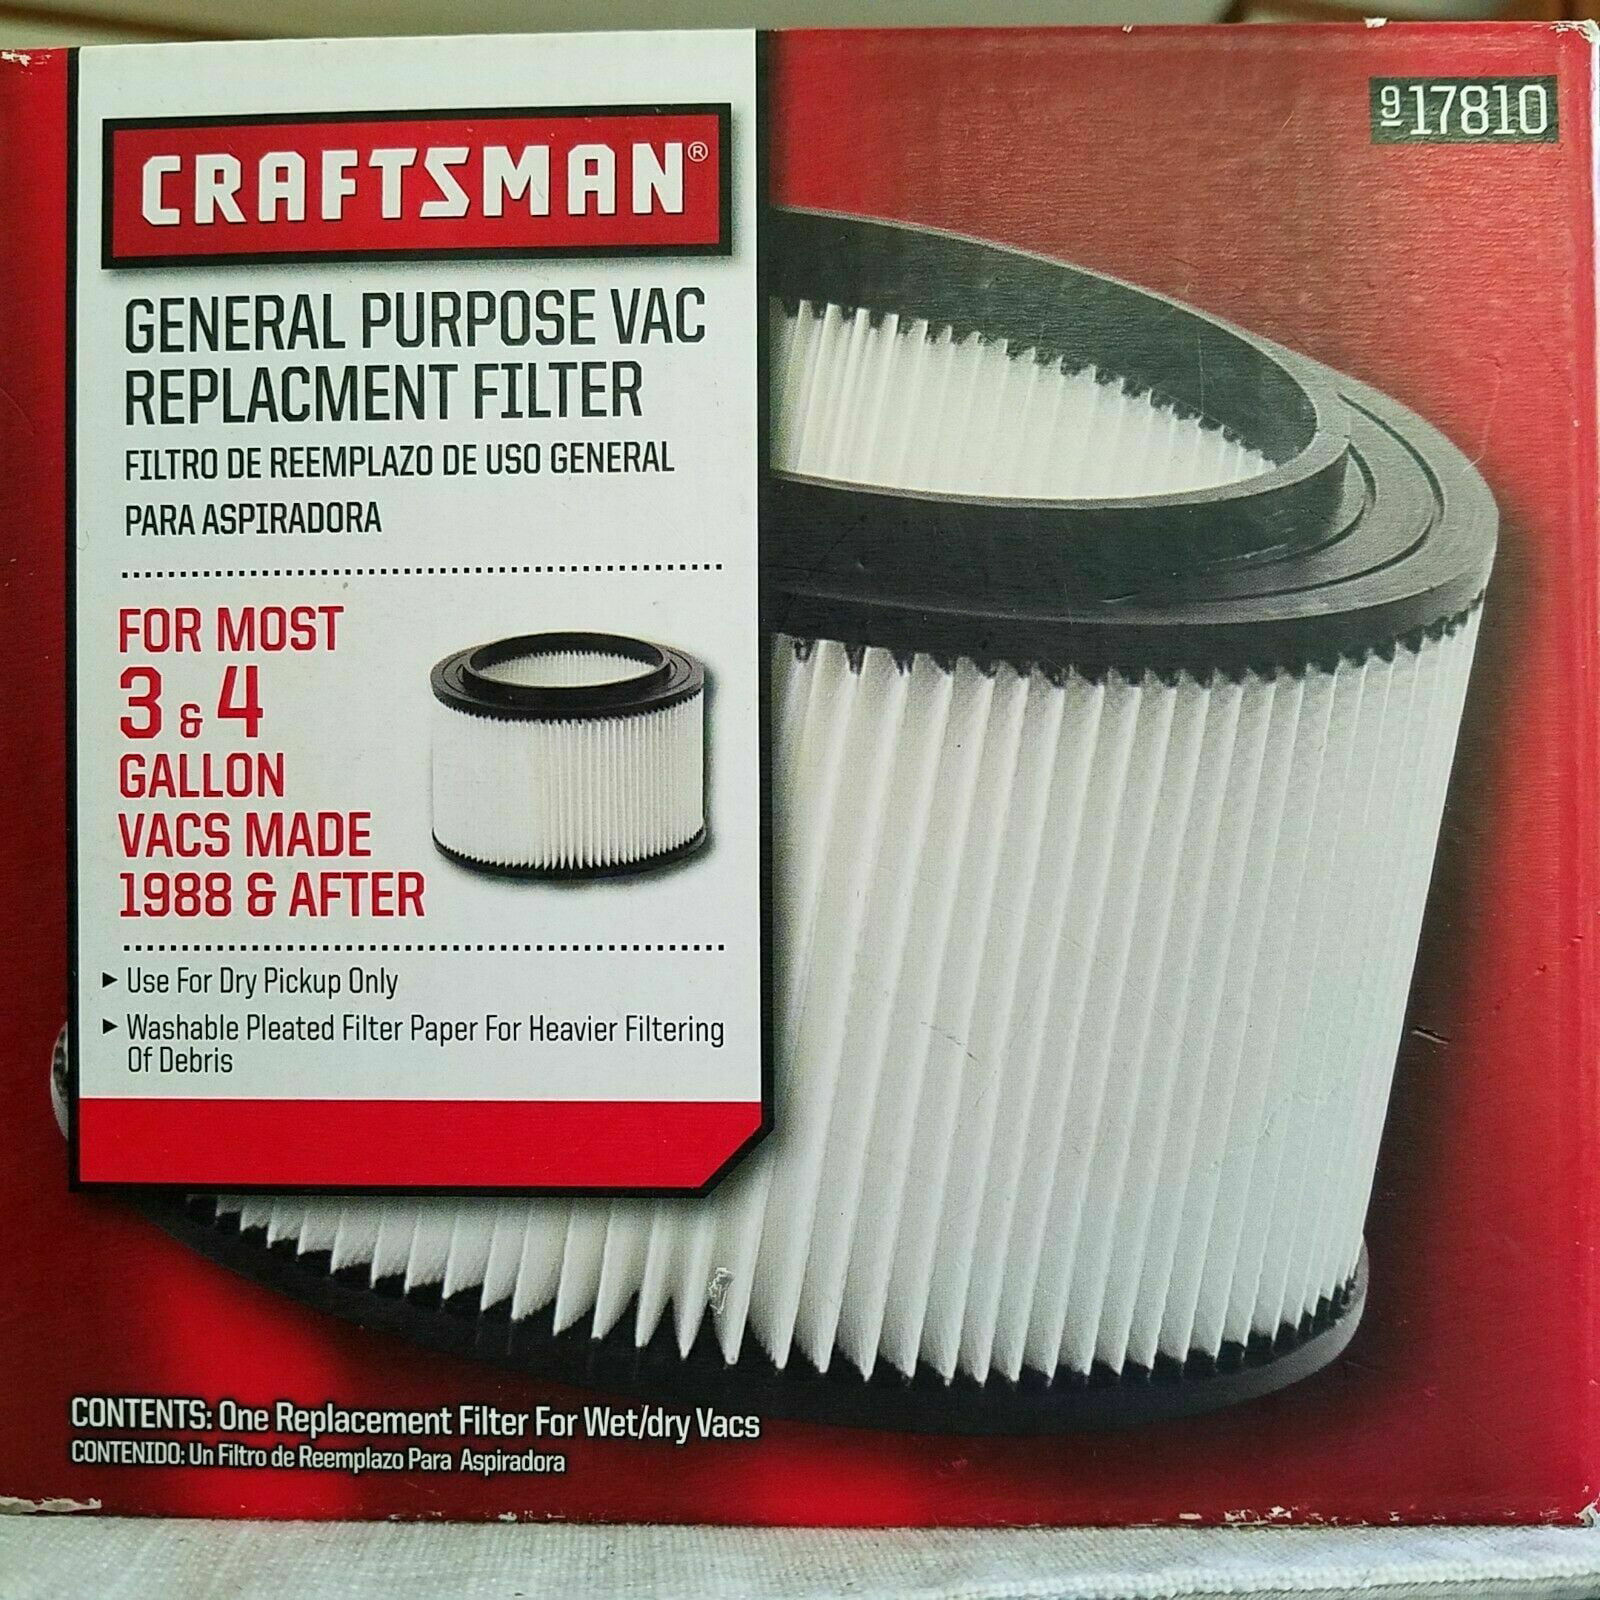 Replacement Filter 9-17810 for Craftsman Shop Vac 3 to 4 Gallon Wet/Dry Vacs 